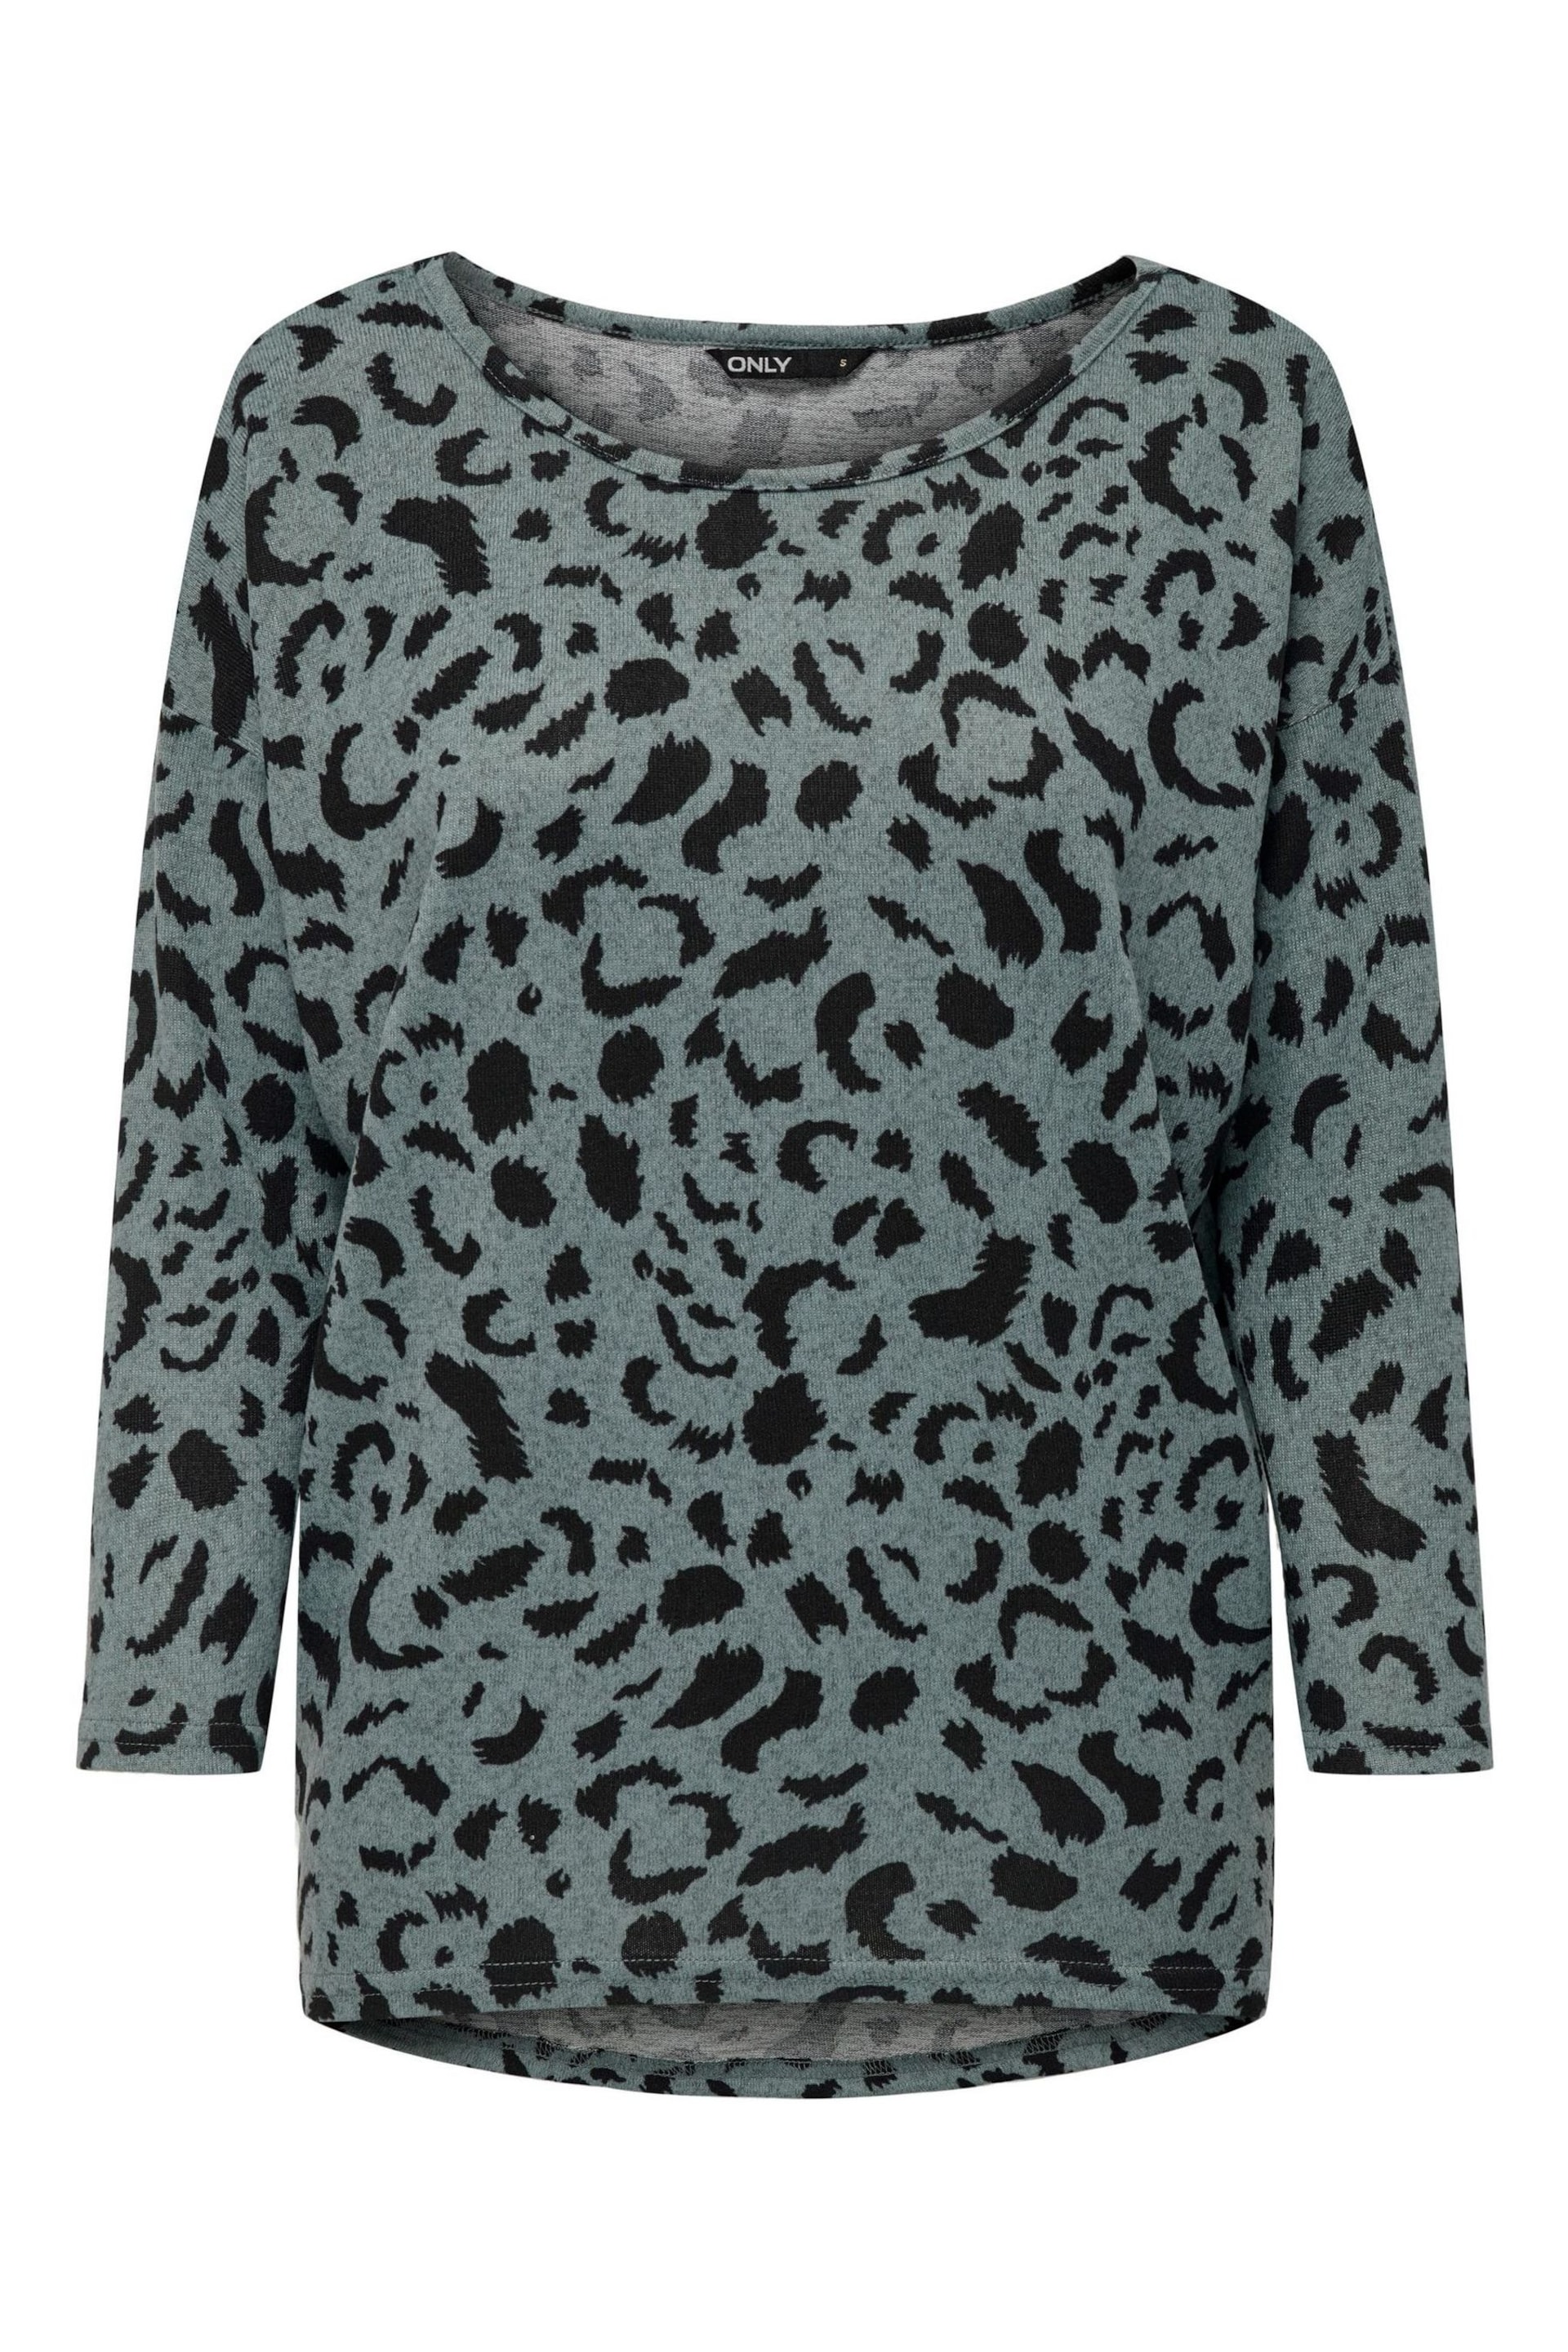 ONLY Green Lightweight Knit Printed Jumper - Image 5 of 5